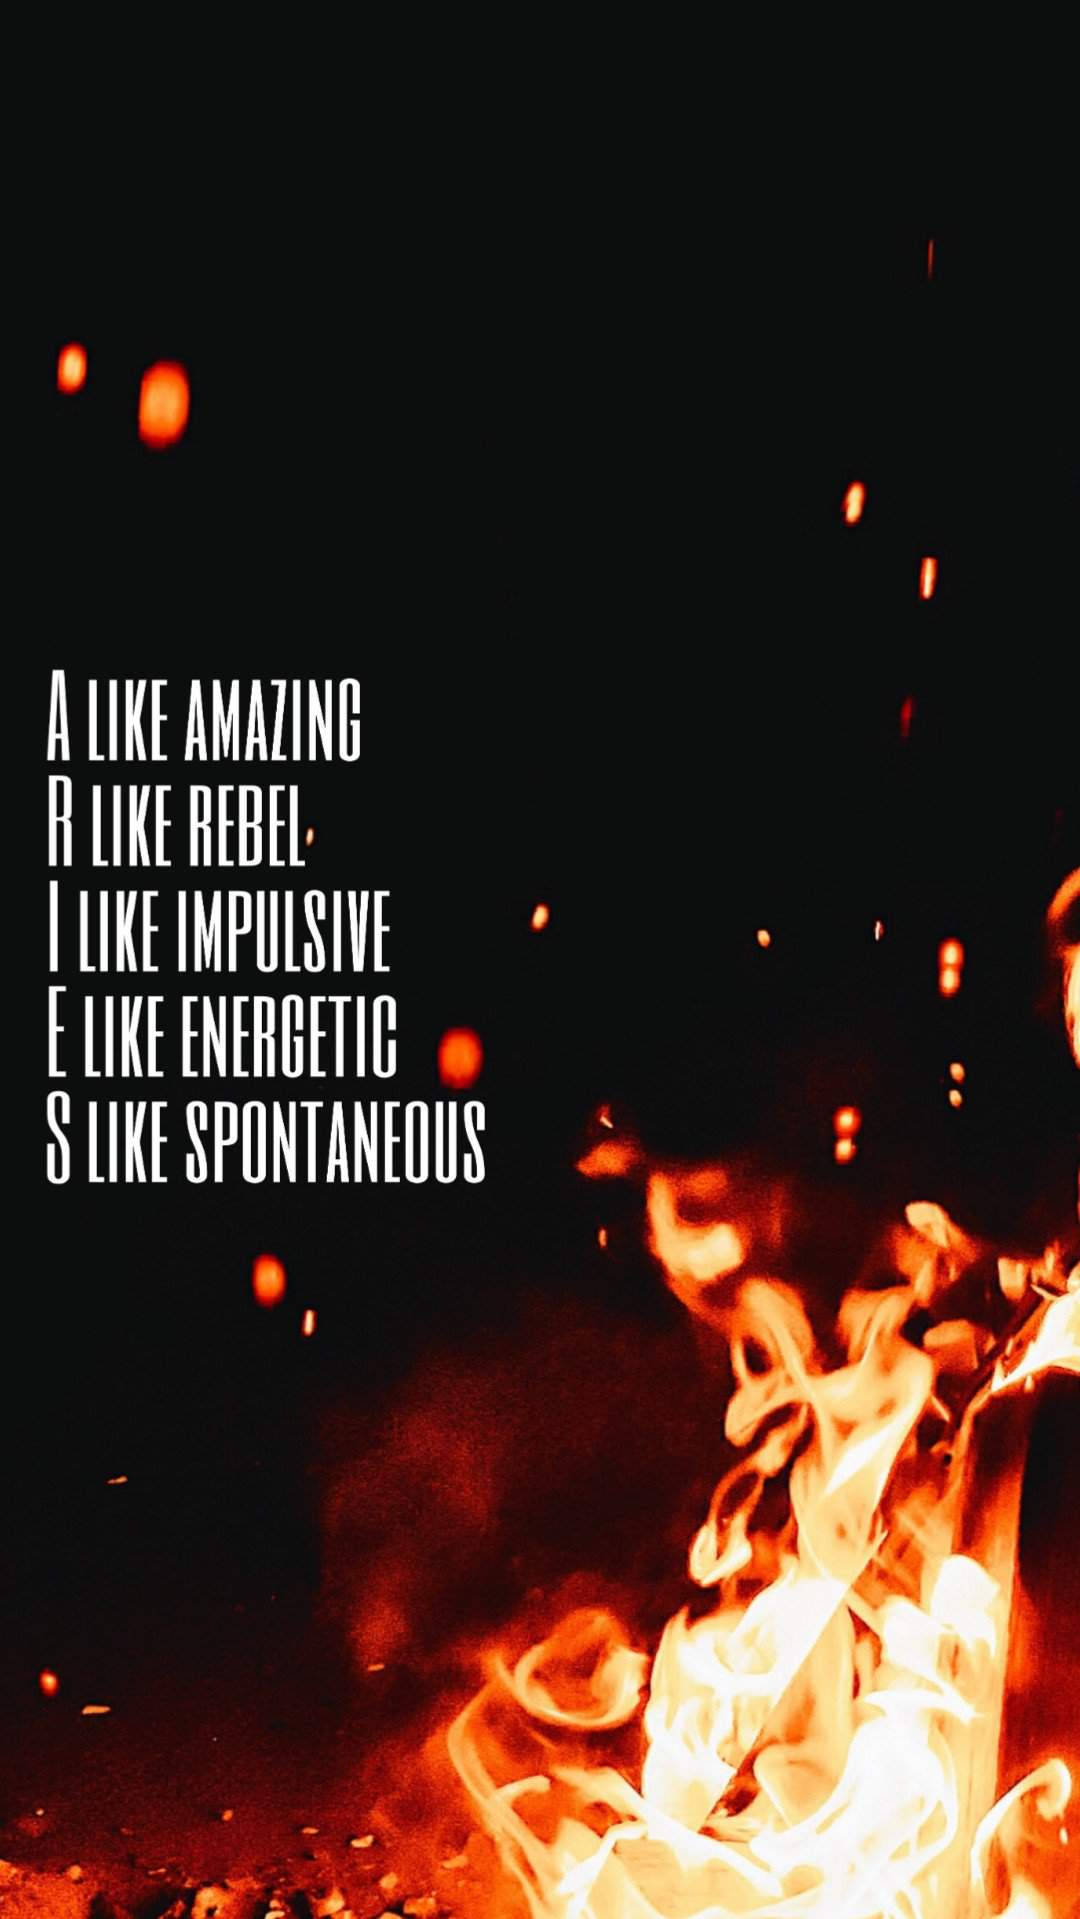 Aries Aesthetic Meaning With Fire Background